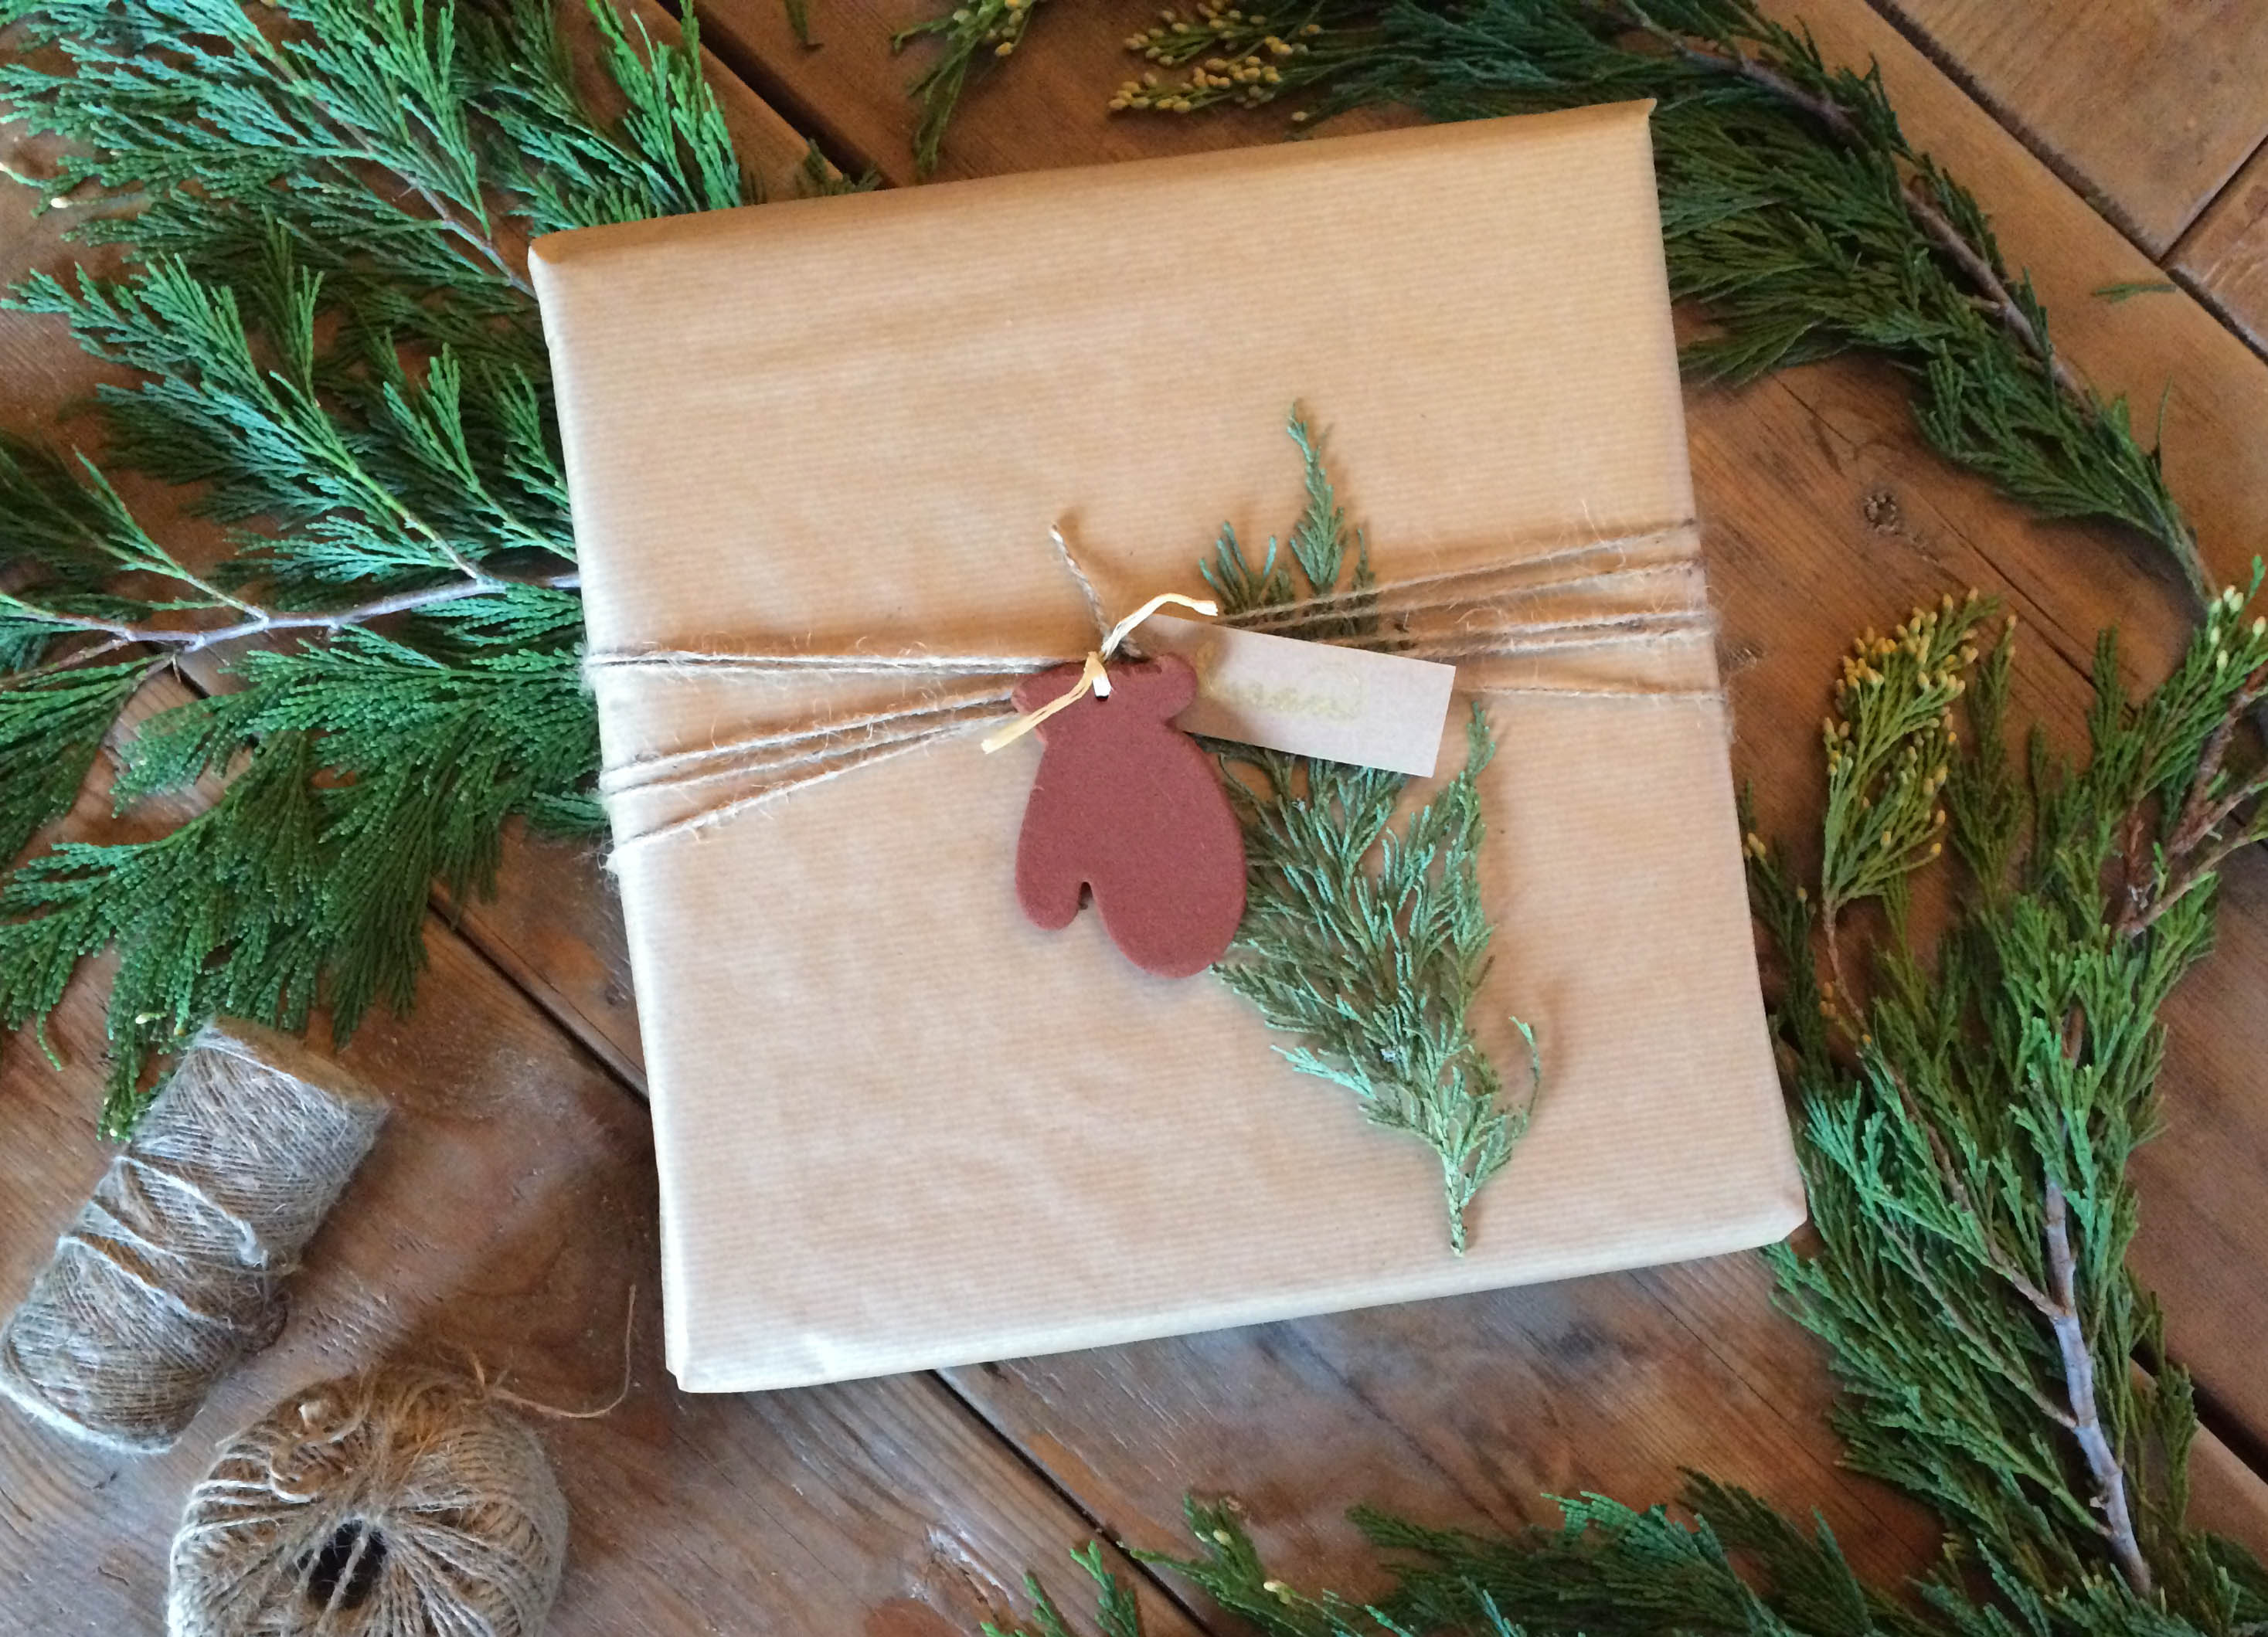 A Life's Patina Christmas Blog Series: Part Four ~ The Gift Wrapping -  Celebrating the Beauty of Life, Past & Present